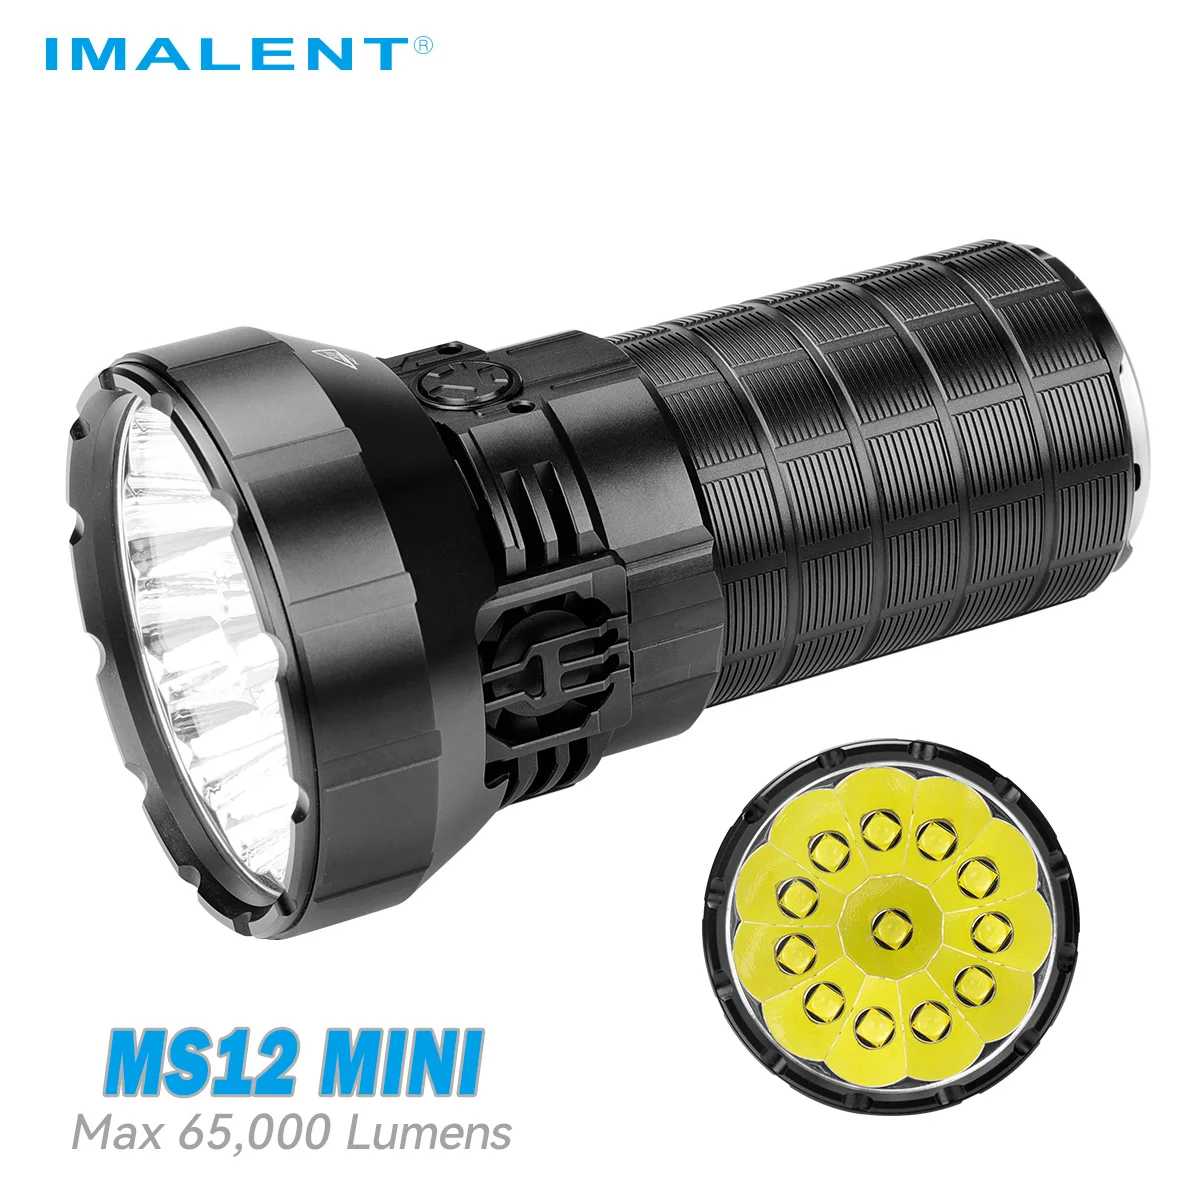 IMALENT MS12 MINI 65000Lumens Powerful Flashlight CREE XHP 70.2 LED Rechargeable Ultra-Bright Torch for Camping Hiking Searching